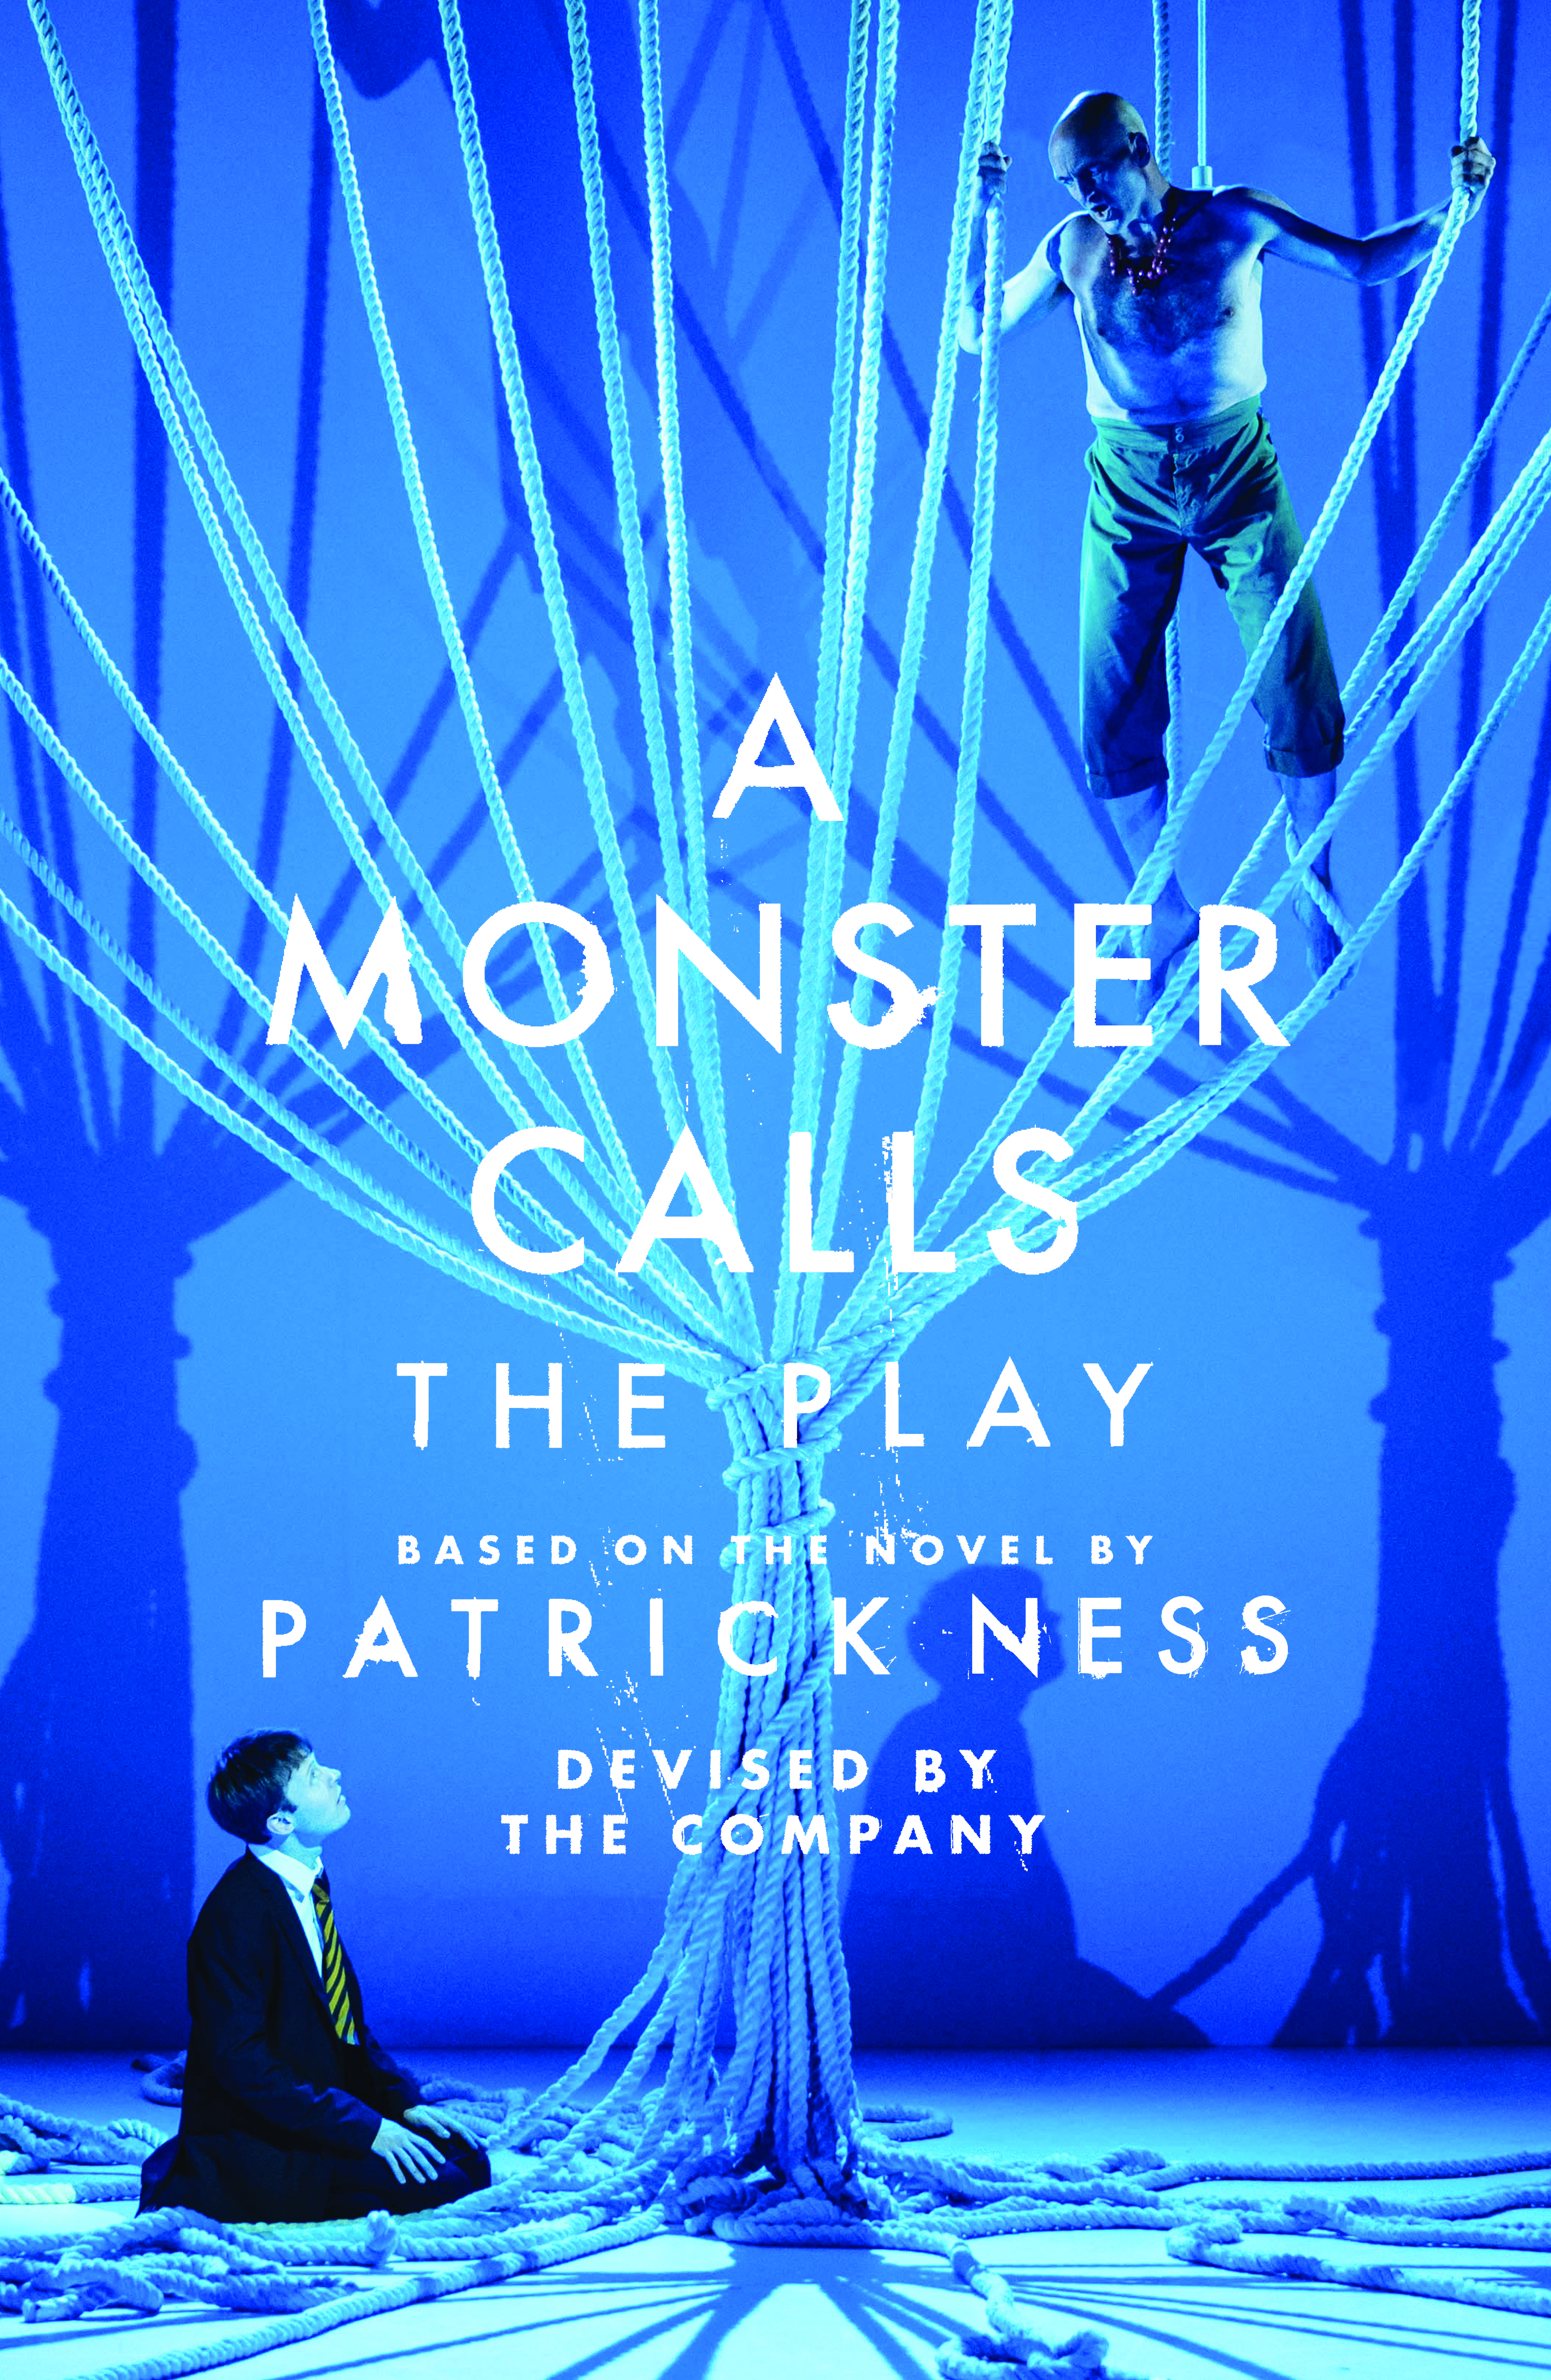 A-Monster-Calls-The-Play